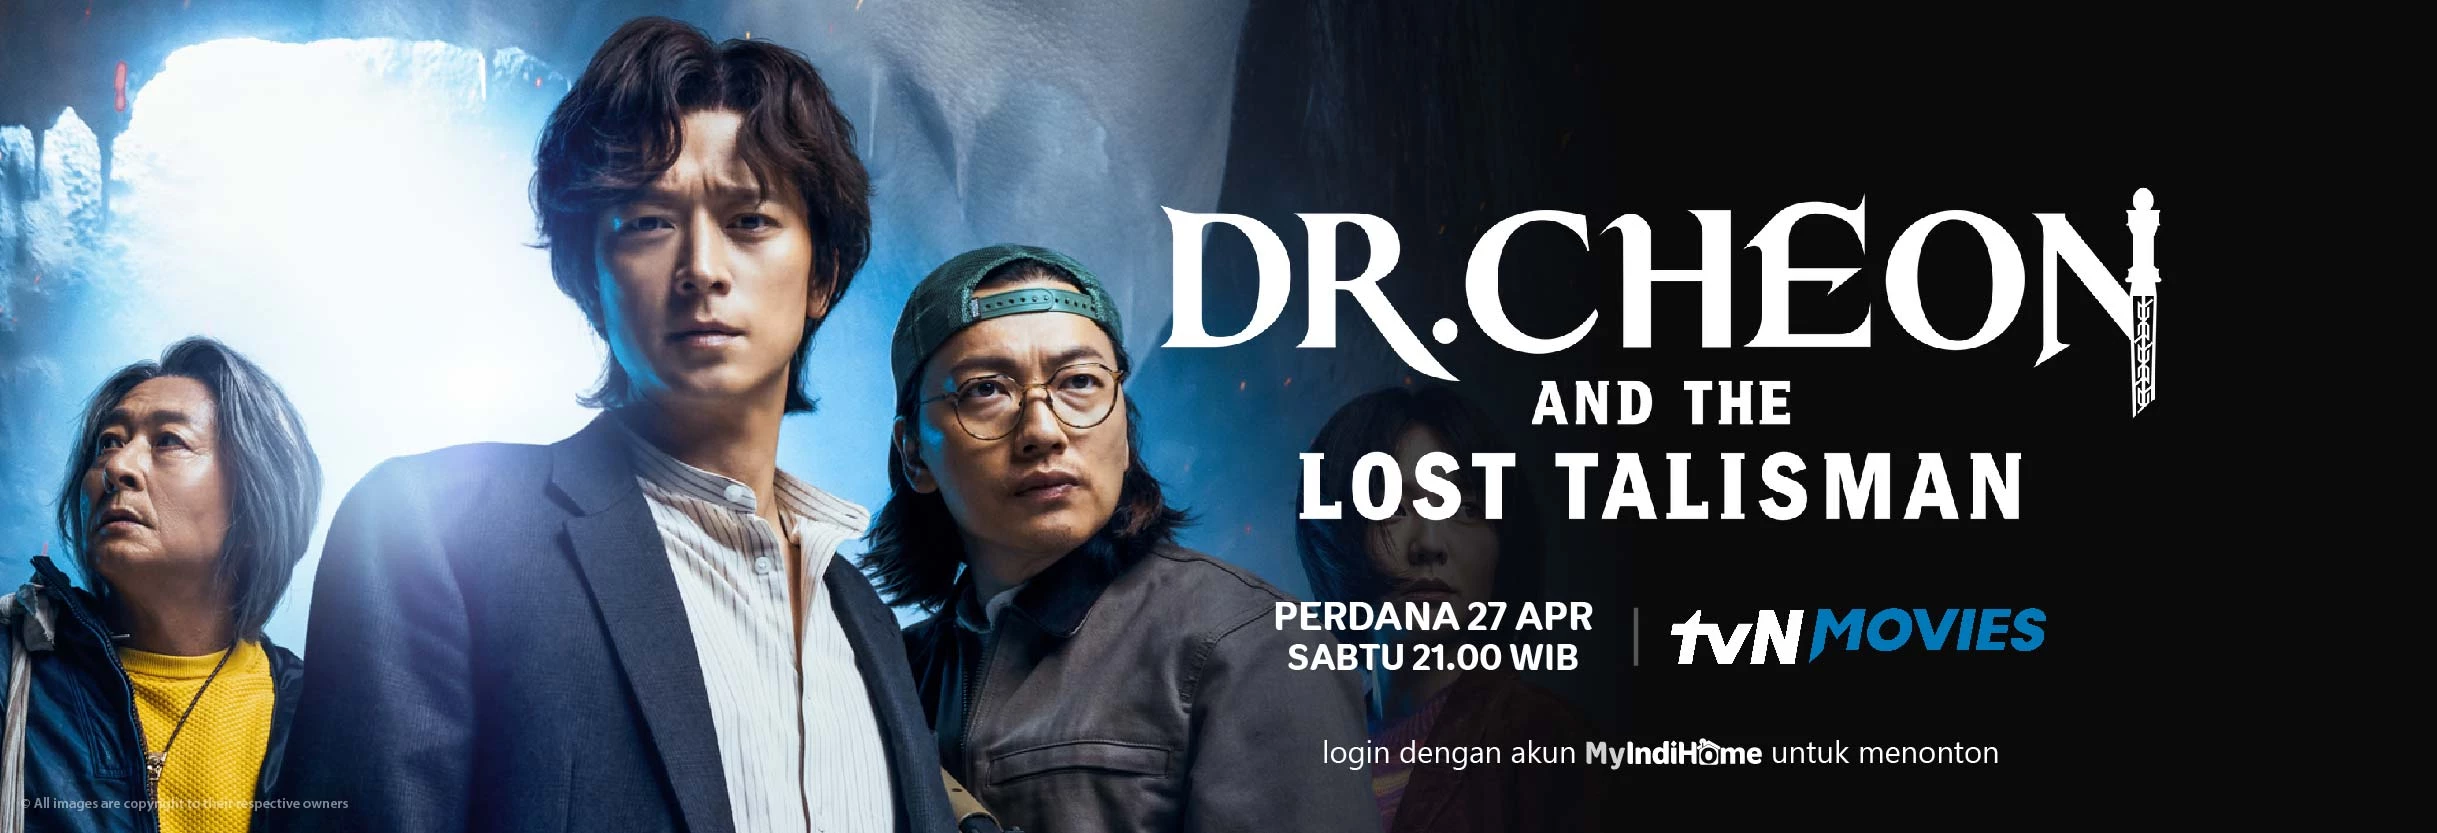 DR CHEON AND THE LOST TALISMAN